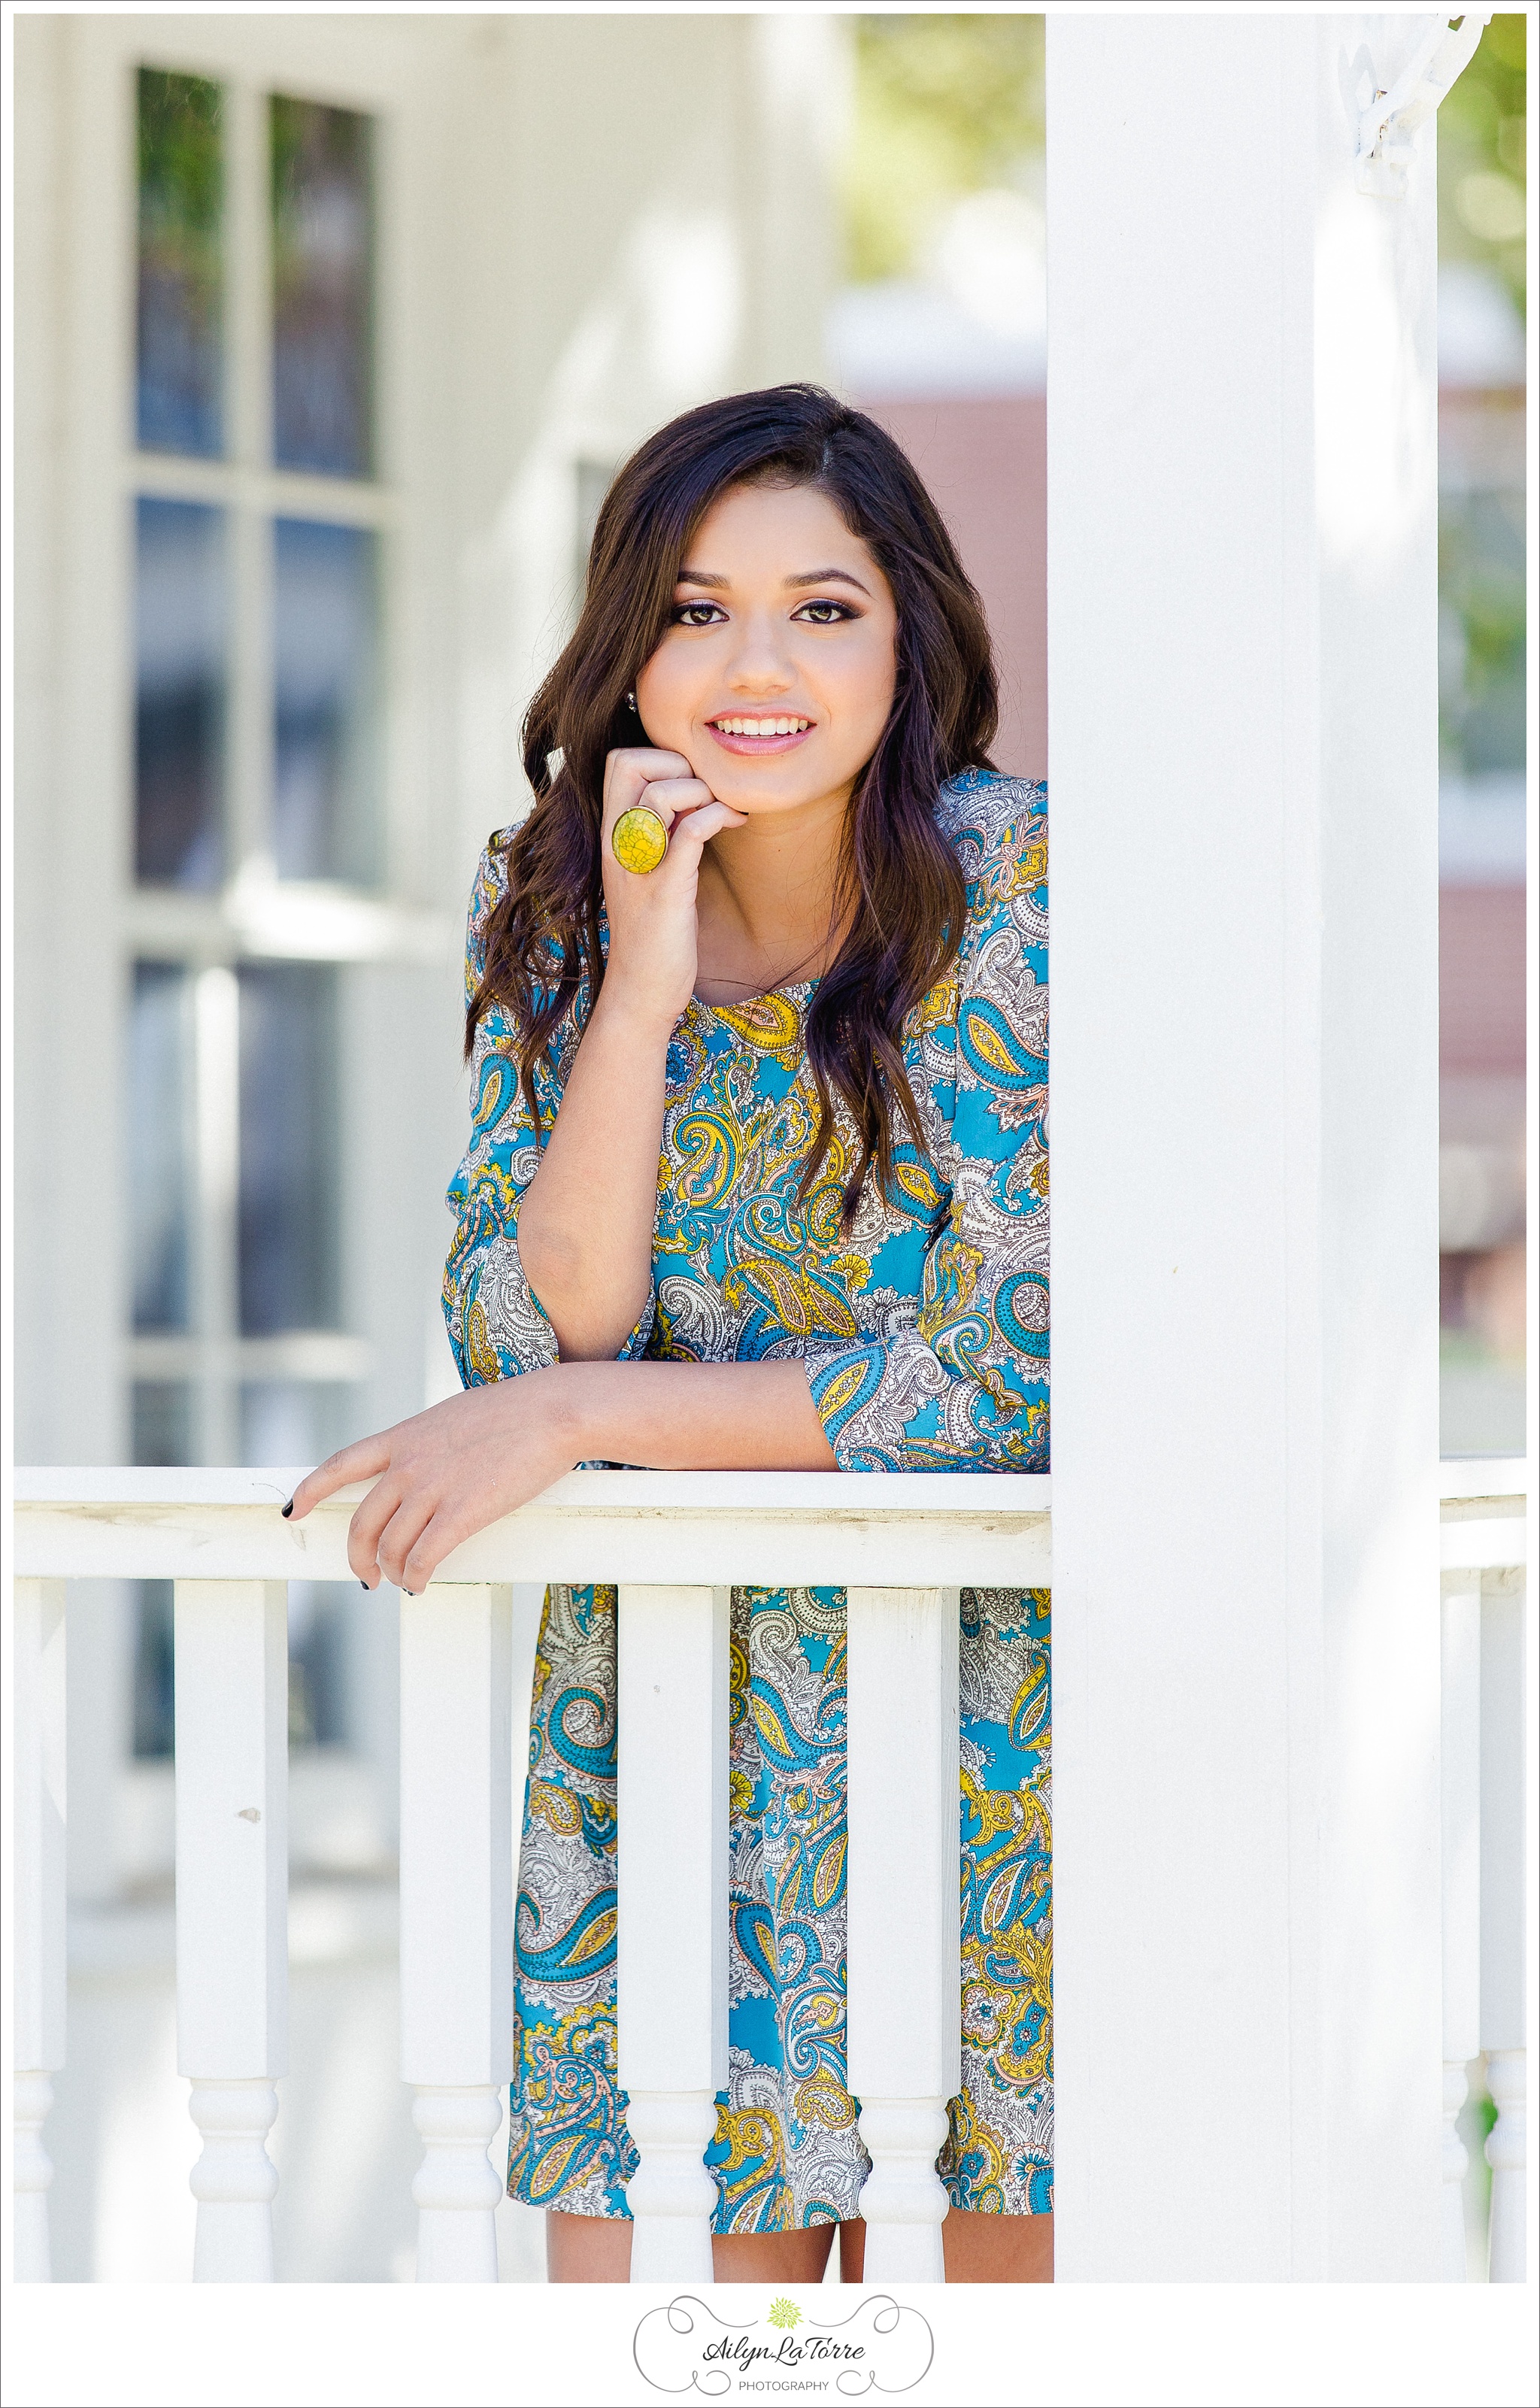 Tampa Senior Photographer | © Ailyn La Torre Photography 2015